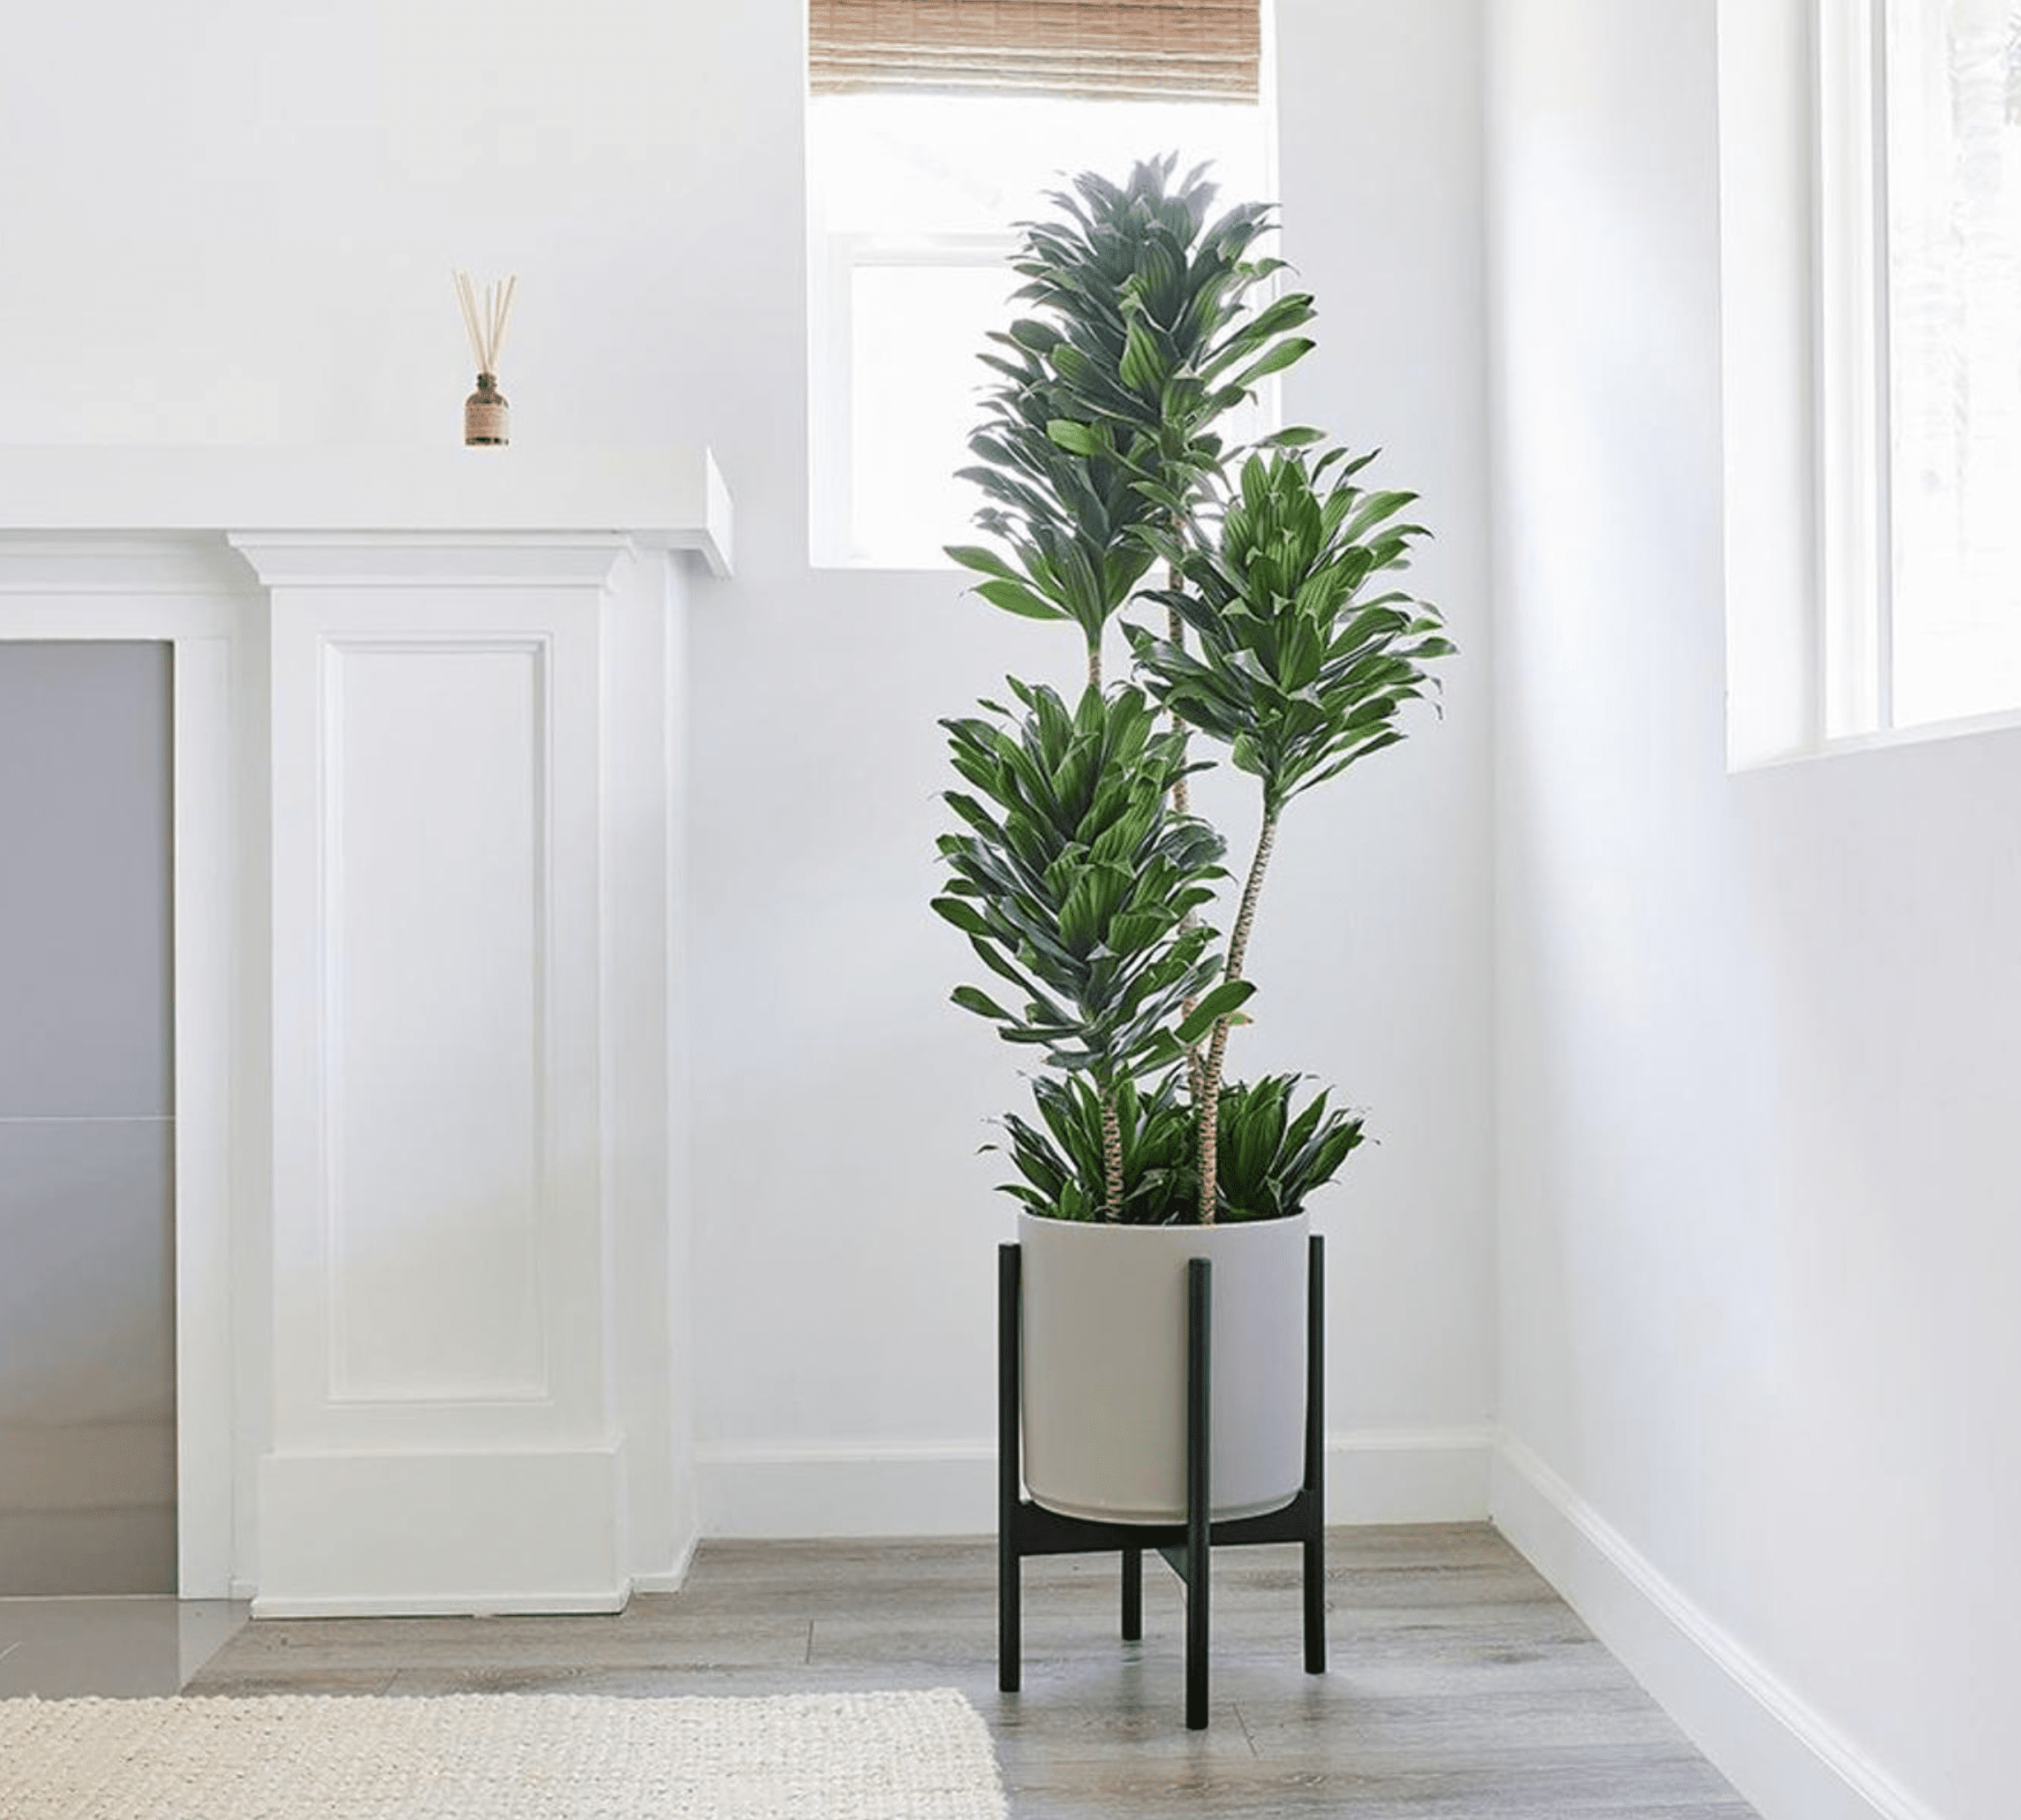 Ornamental Plants for Refreshing Natural Accents